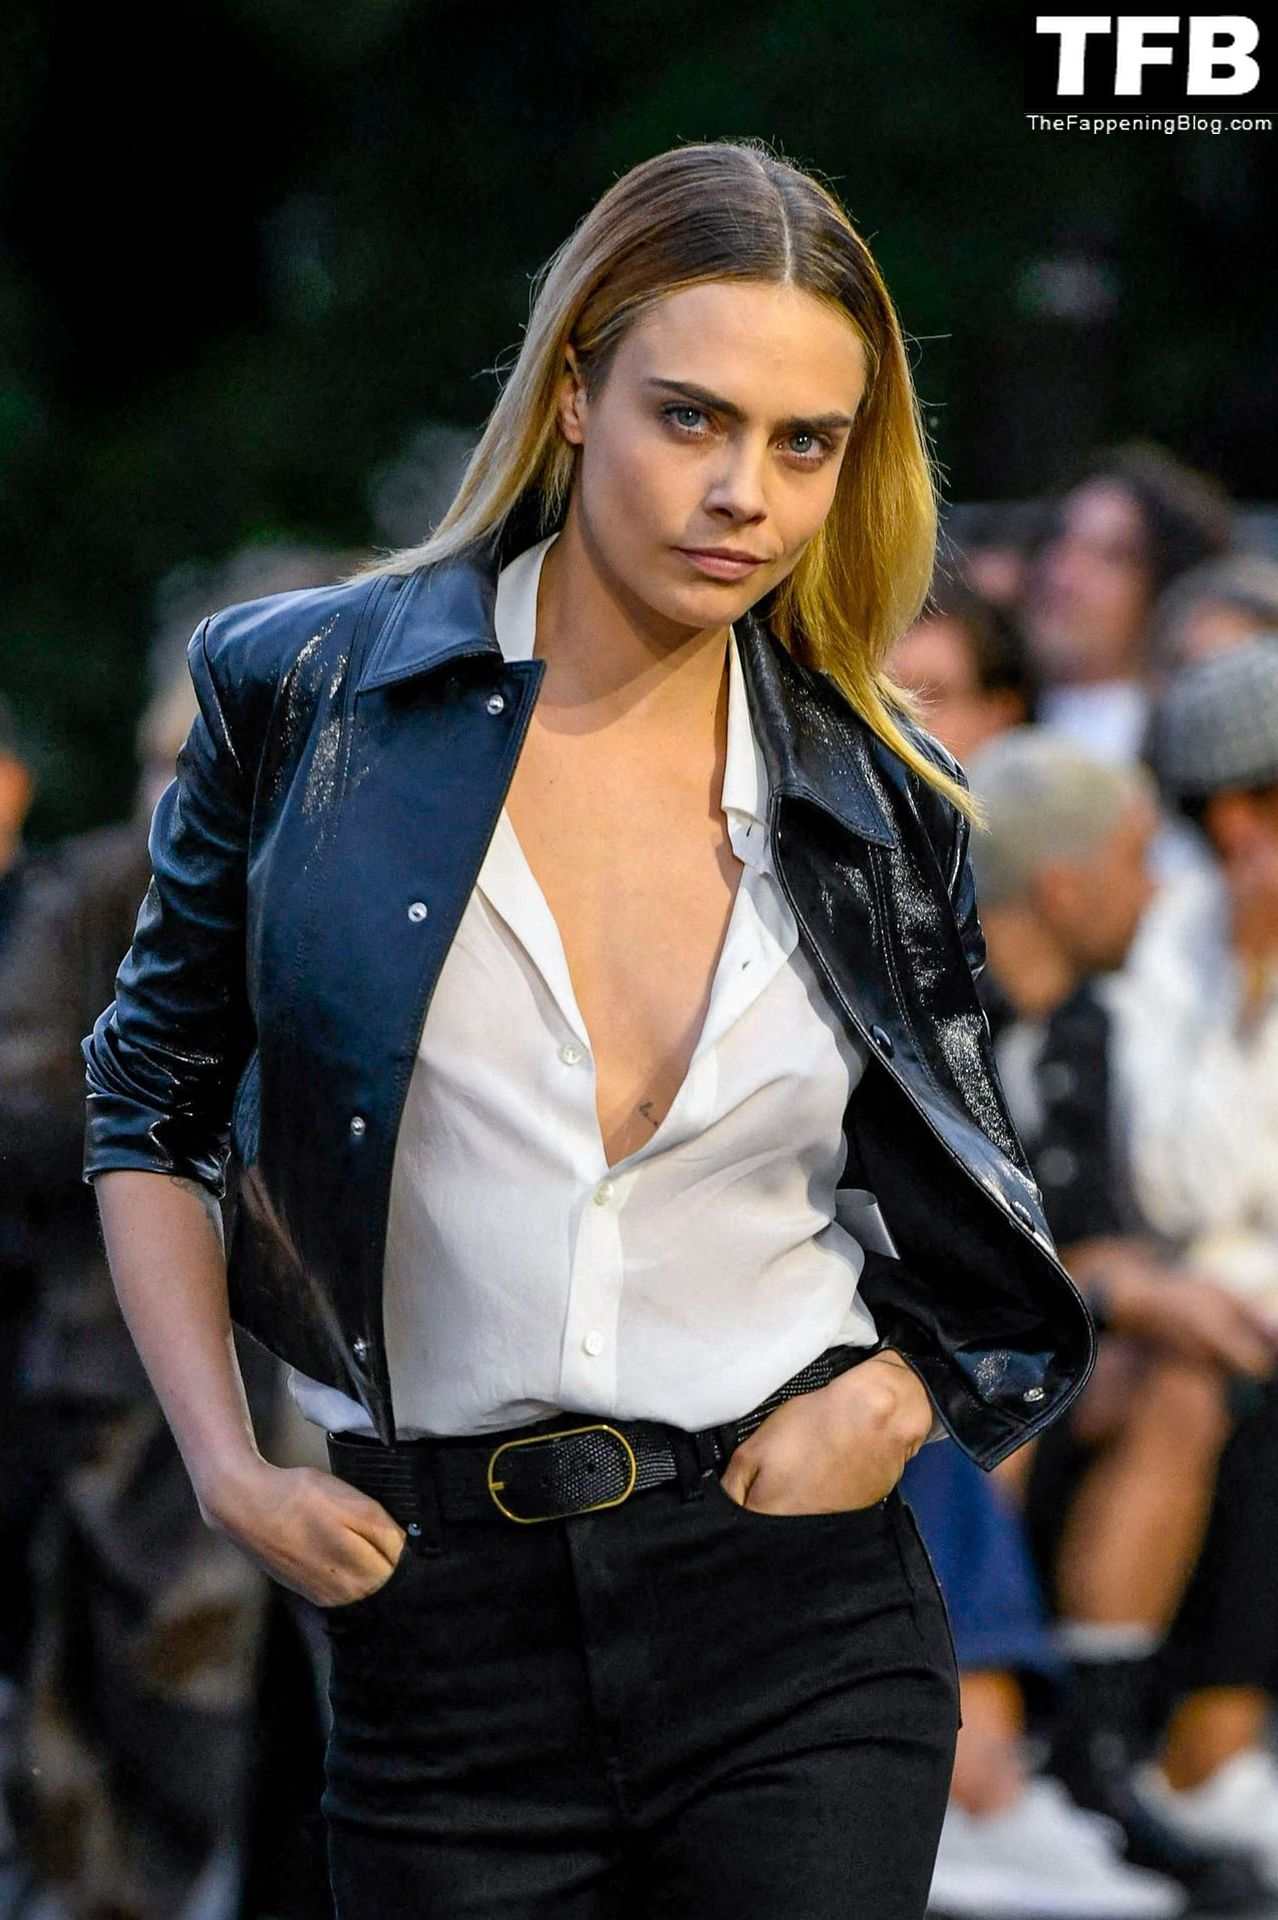 Cara-Delevingne-Sexy-The-Fappening-Blog-18.jpg